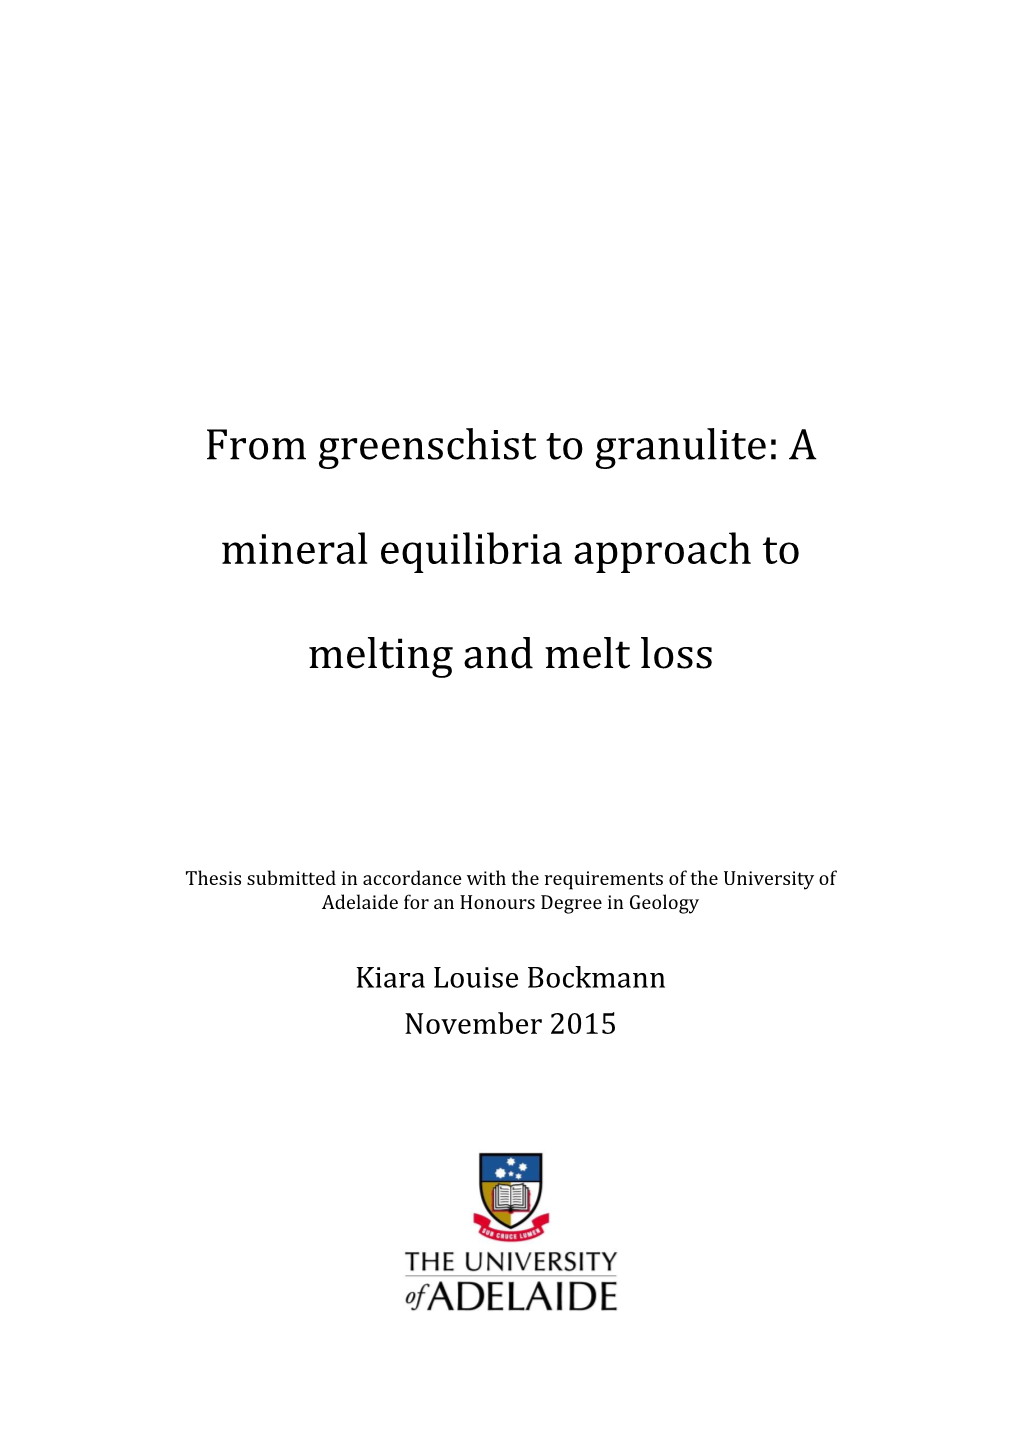 From Greenschist to Granulite: a Mineral Equilibria Approach to Melting and Melt Loss